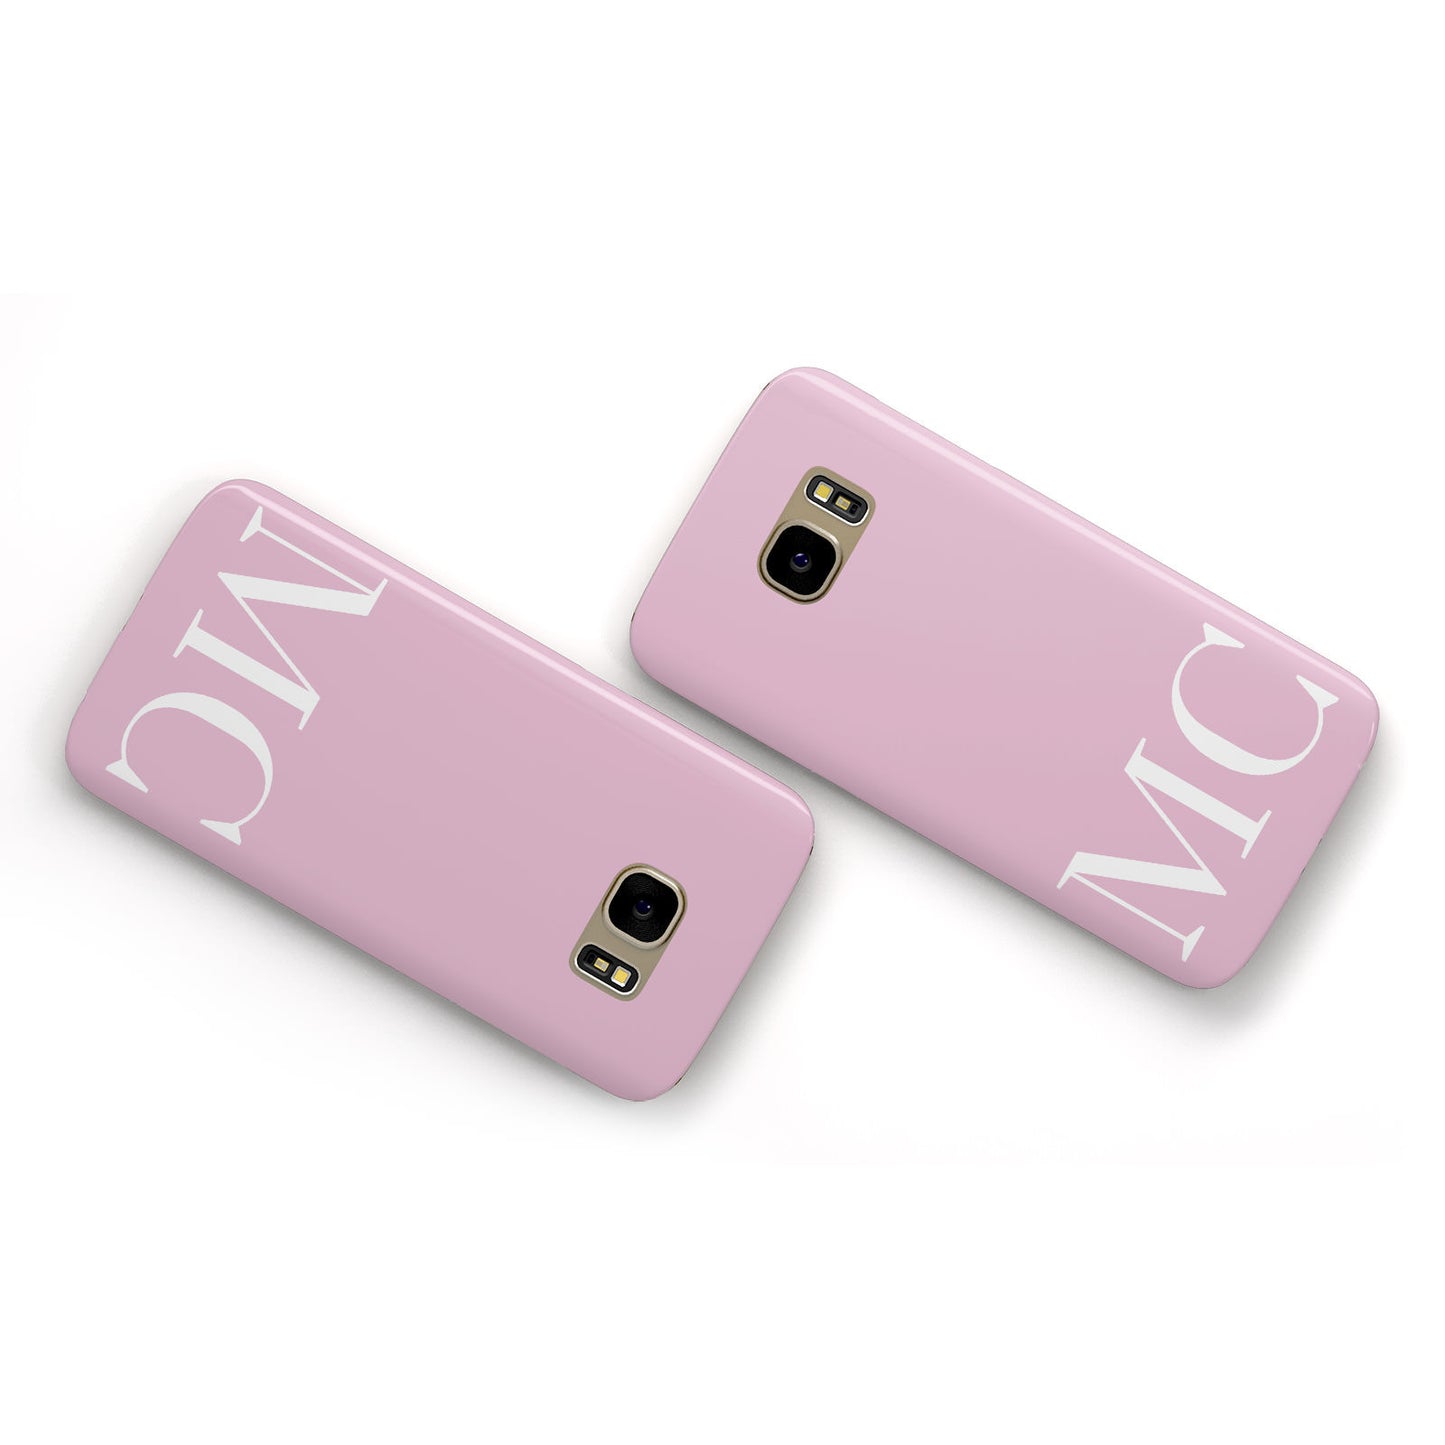 Initials Personalised 2 Samsung Galaxy Case Flat Overview